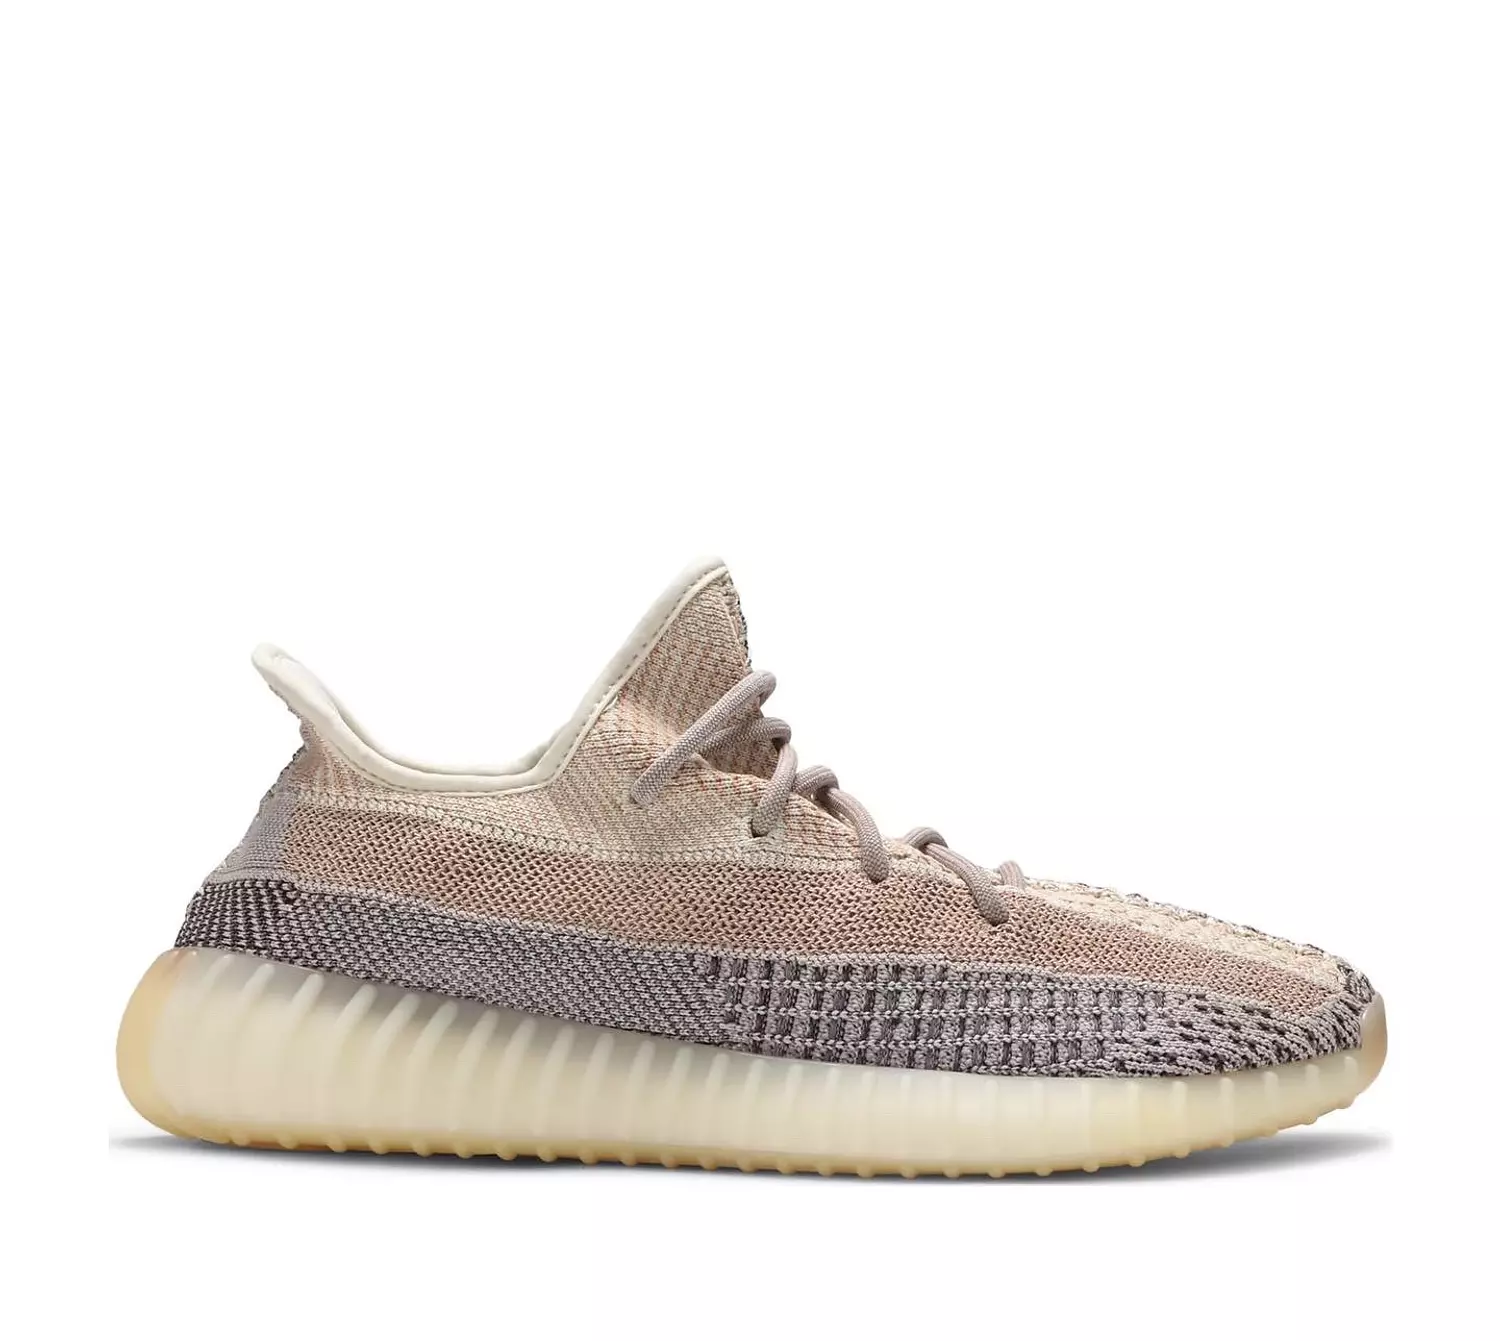 Yeezy Boost 350 V2 'Ash Pearl' hover image